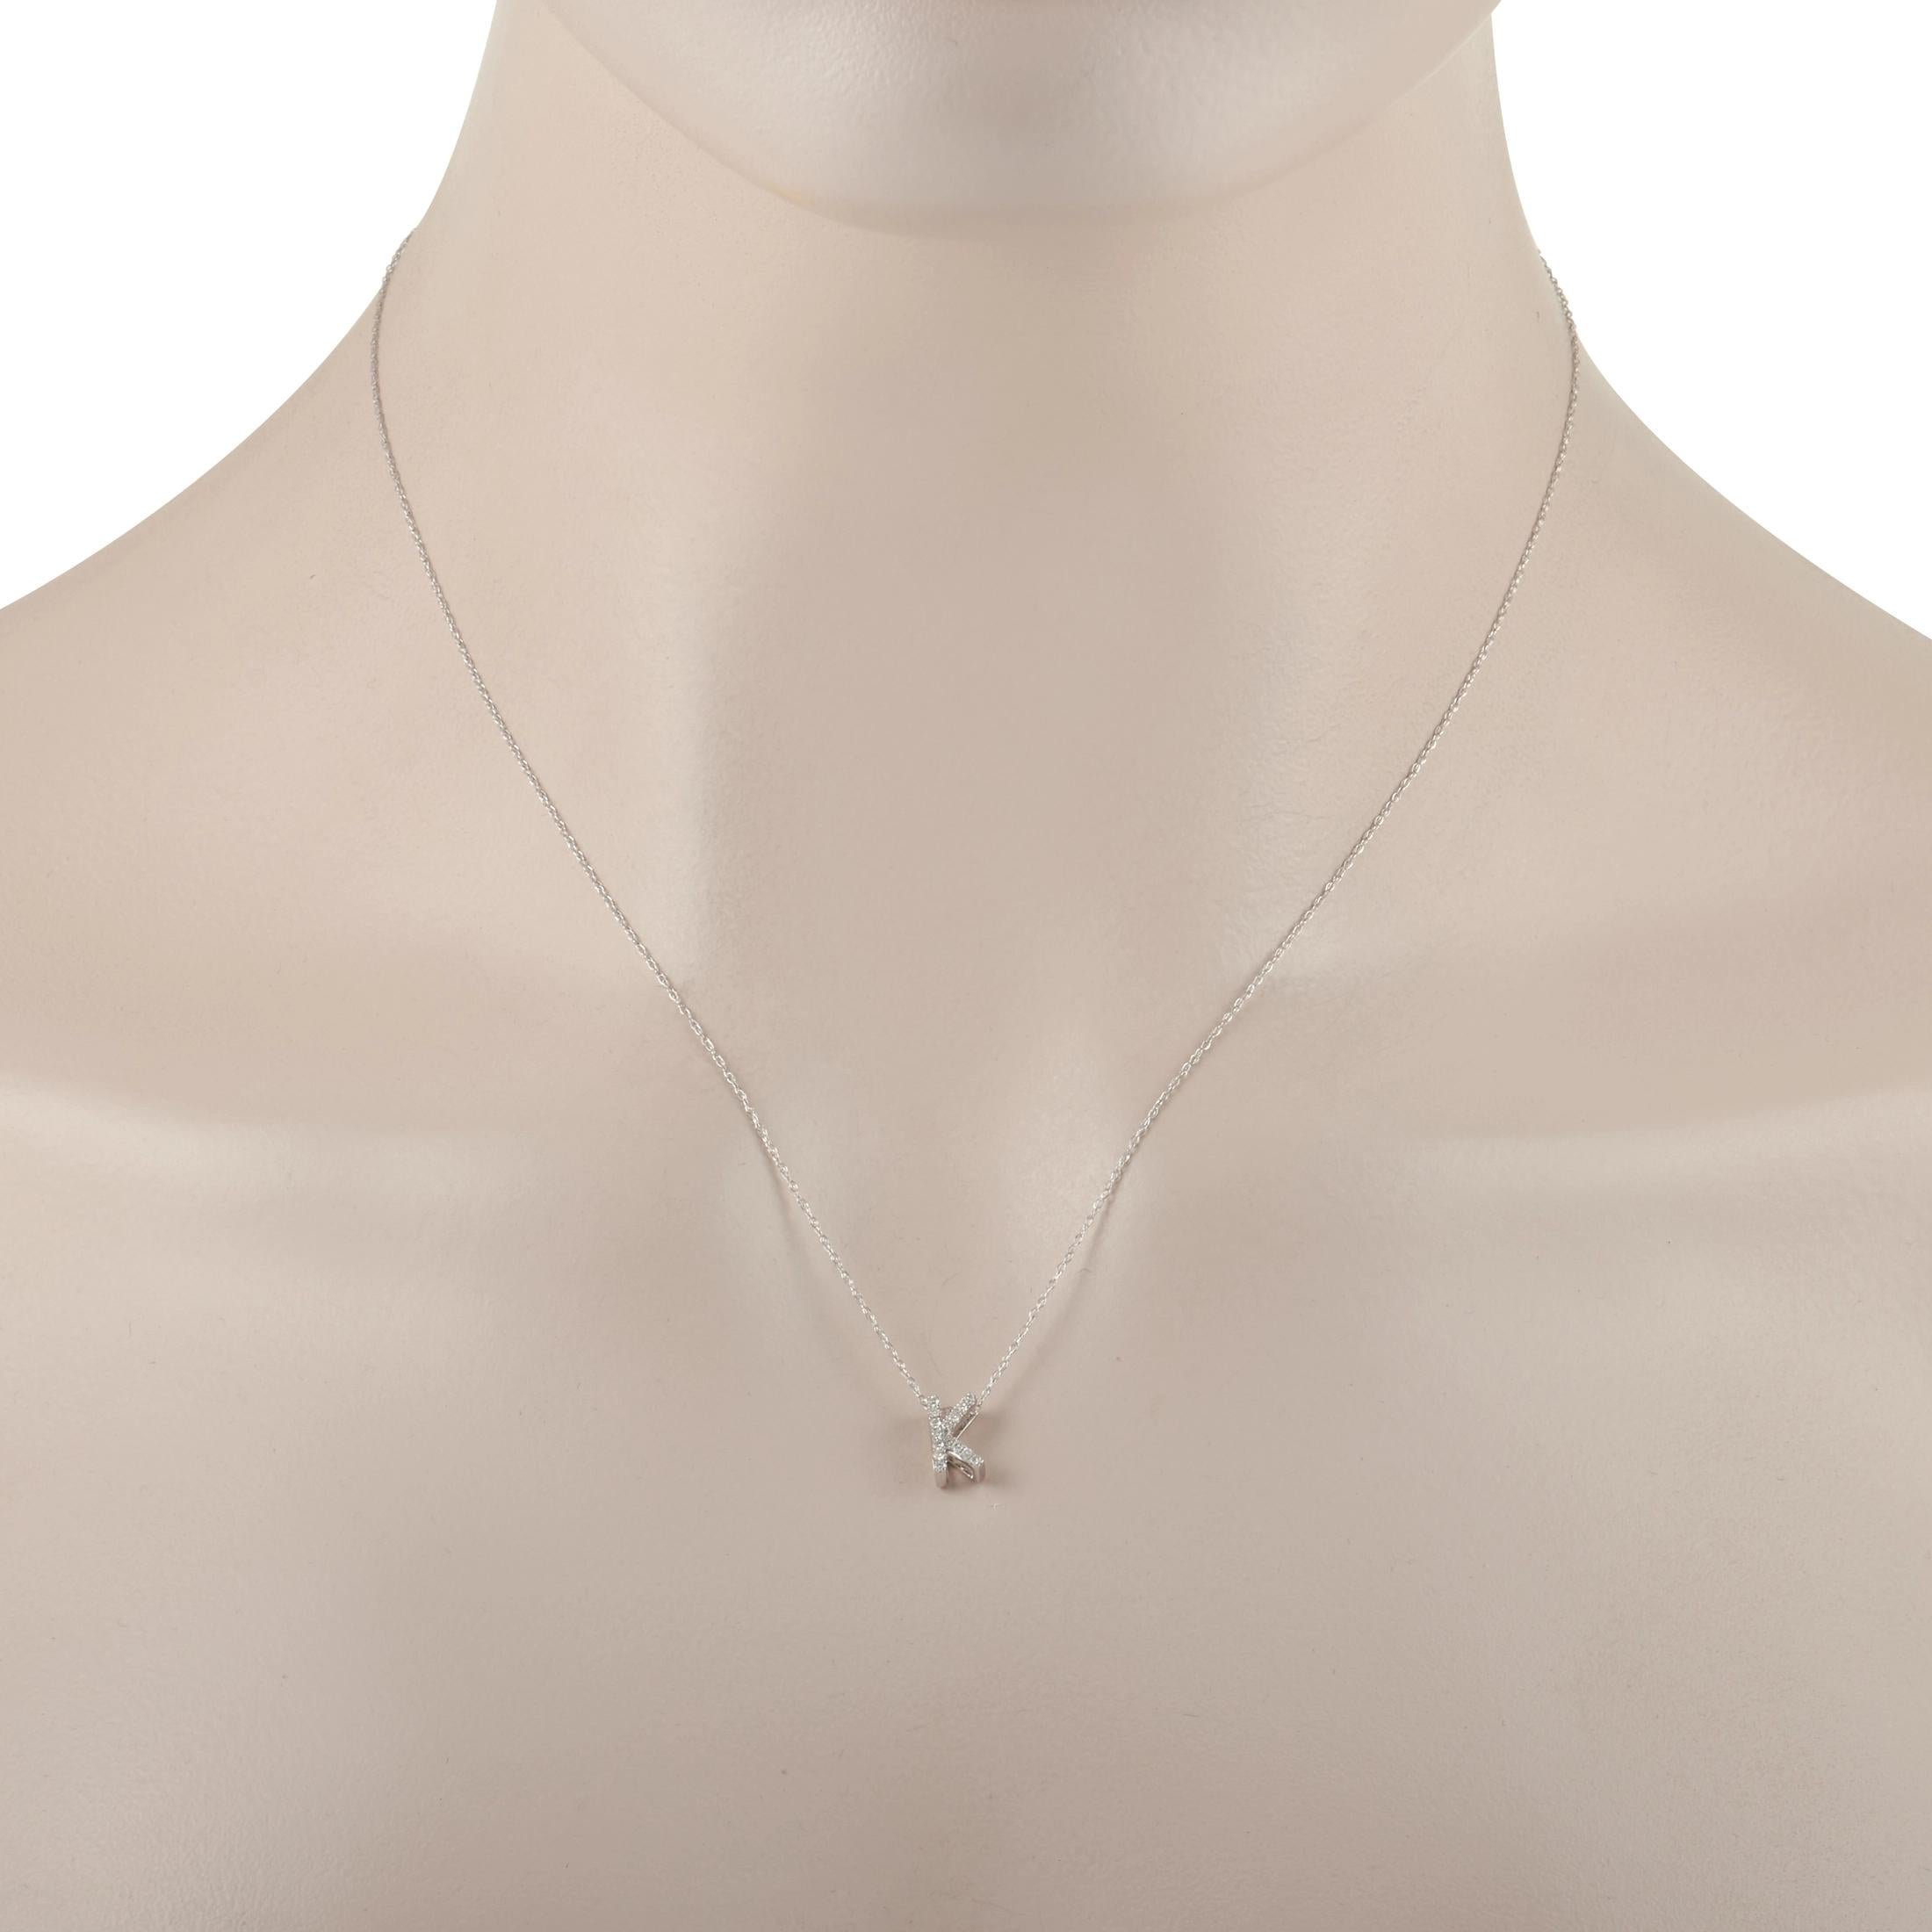 Keep your look timeless with the help of this sweet, simple diamond monogram pendant necklace. On the .38” letter “K” pendant, you’ll find shimmering diamonds that total 0.10 carats. Beautifully crafted from 14K White Gold, this classic design